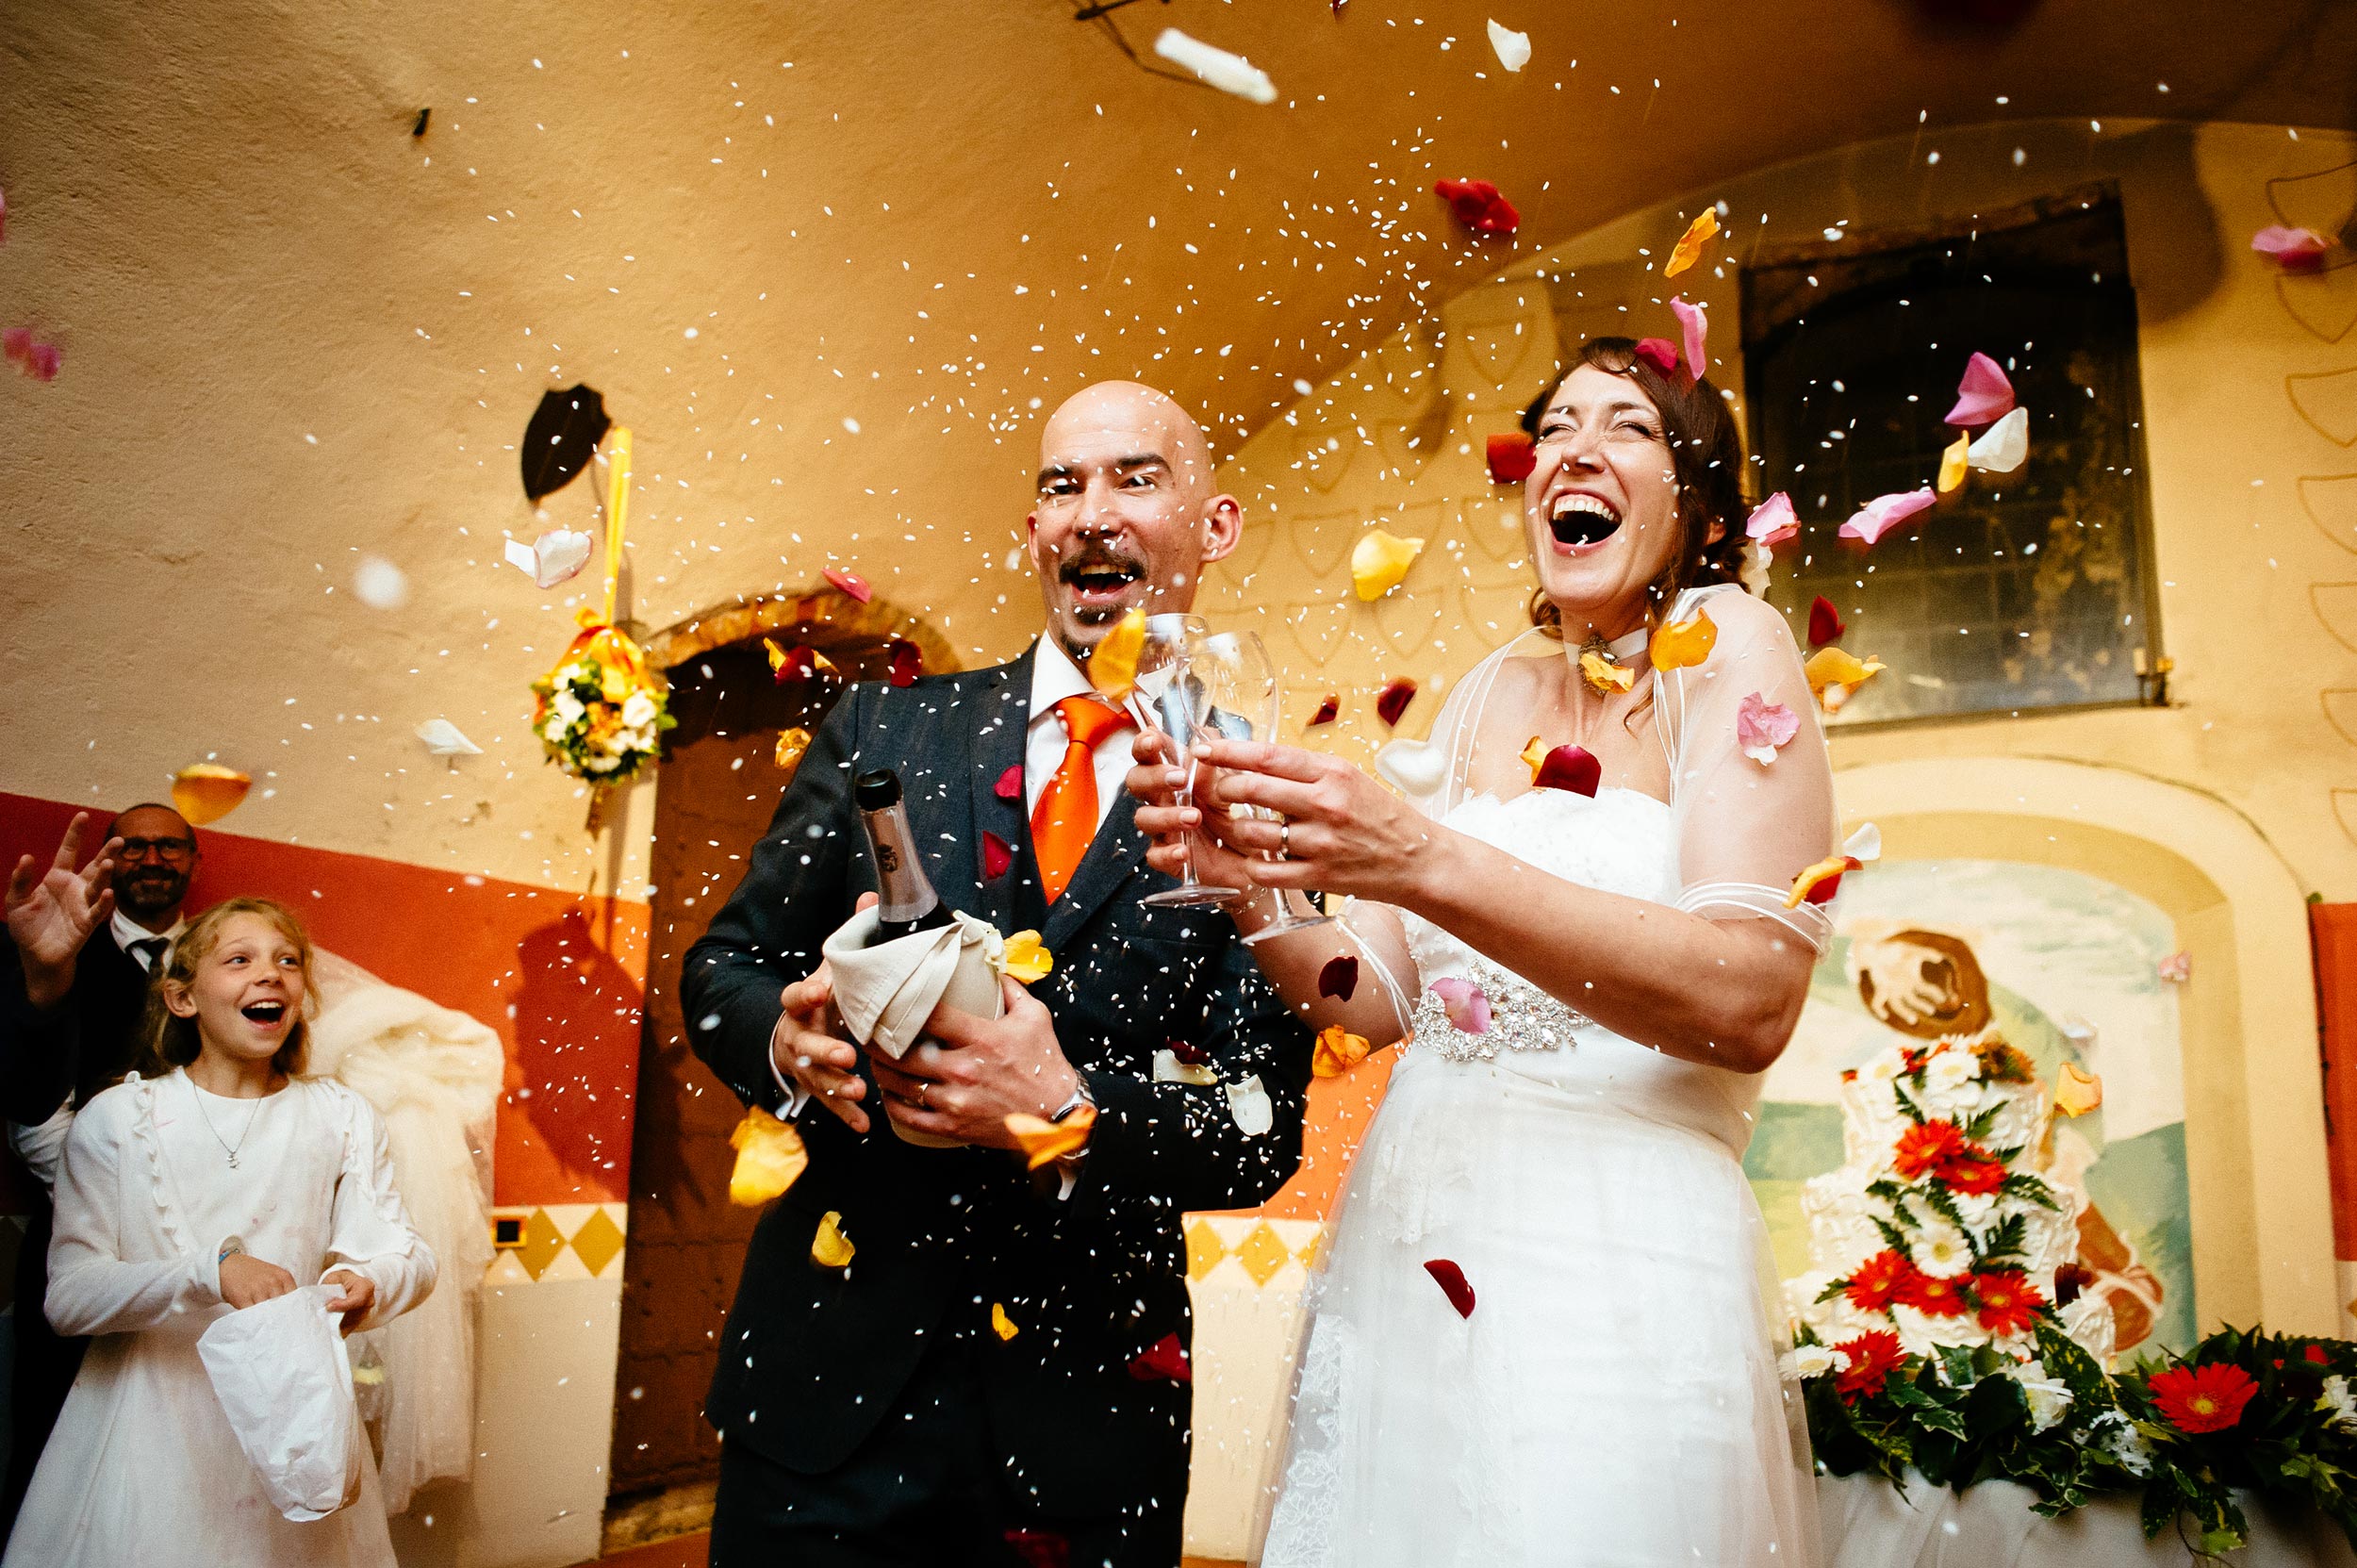 wedding-toast-with-rice-and-petals-confetti-explosion.jpg